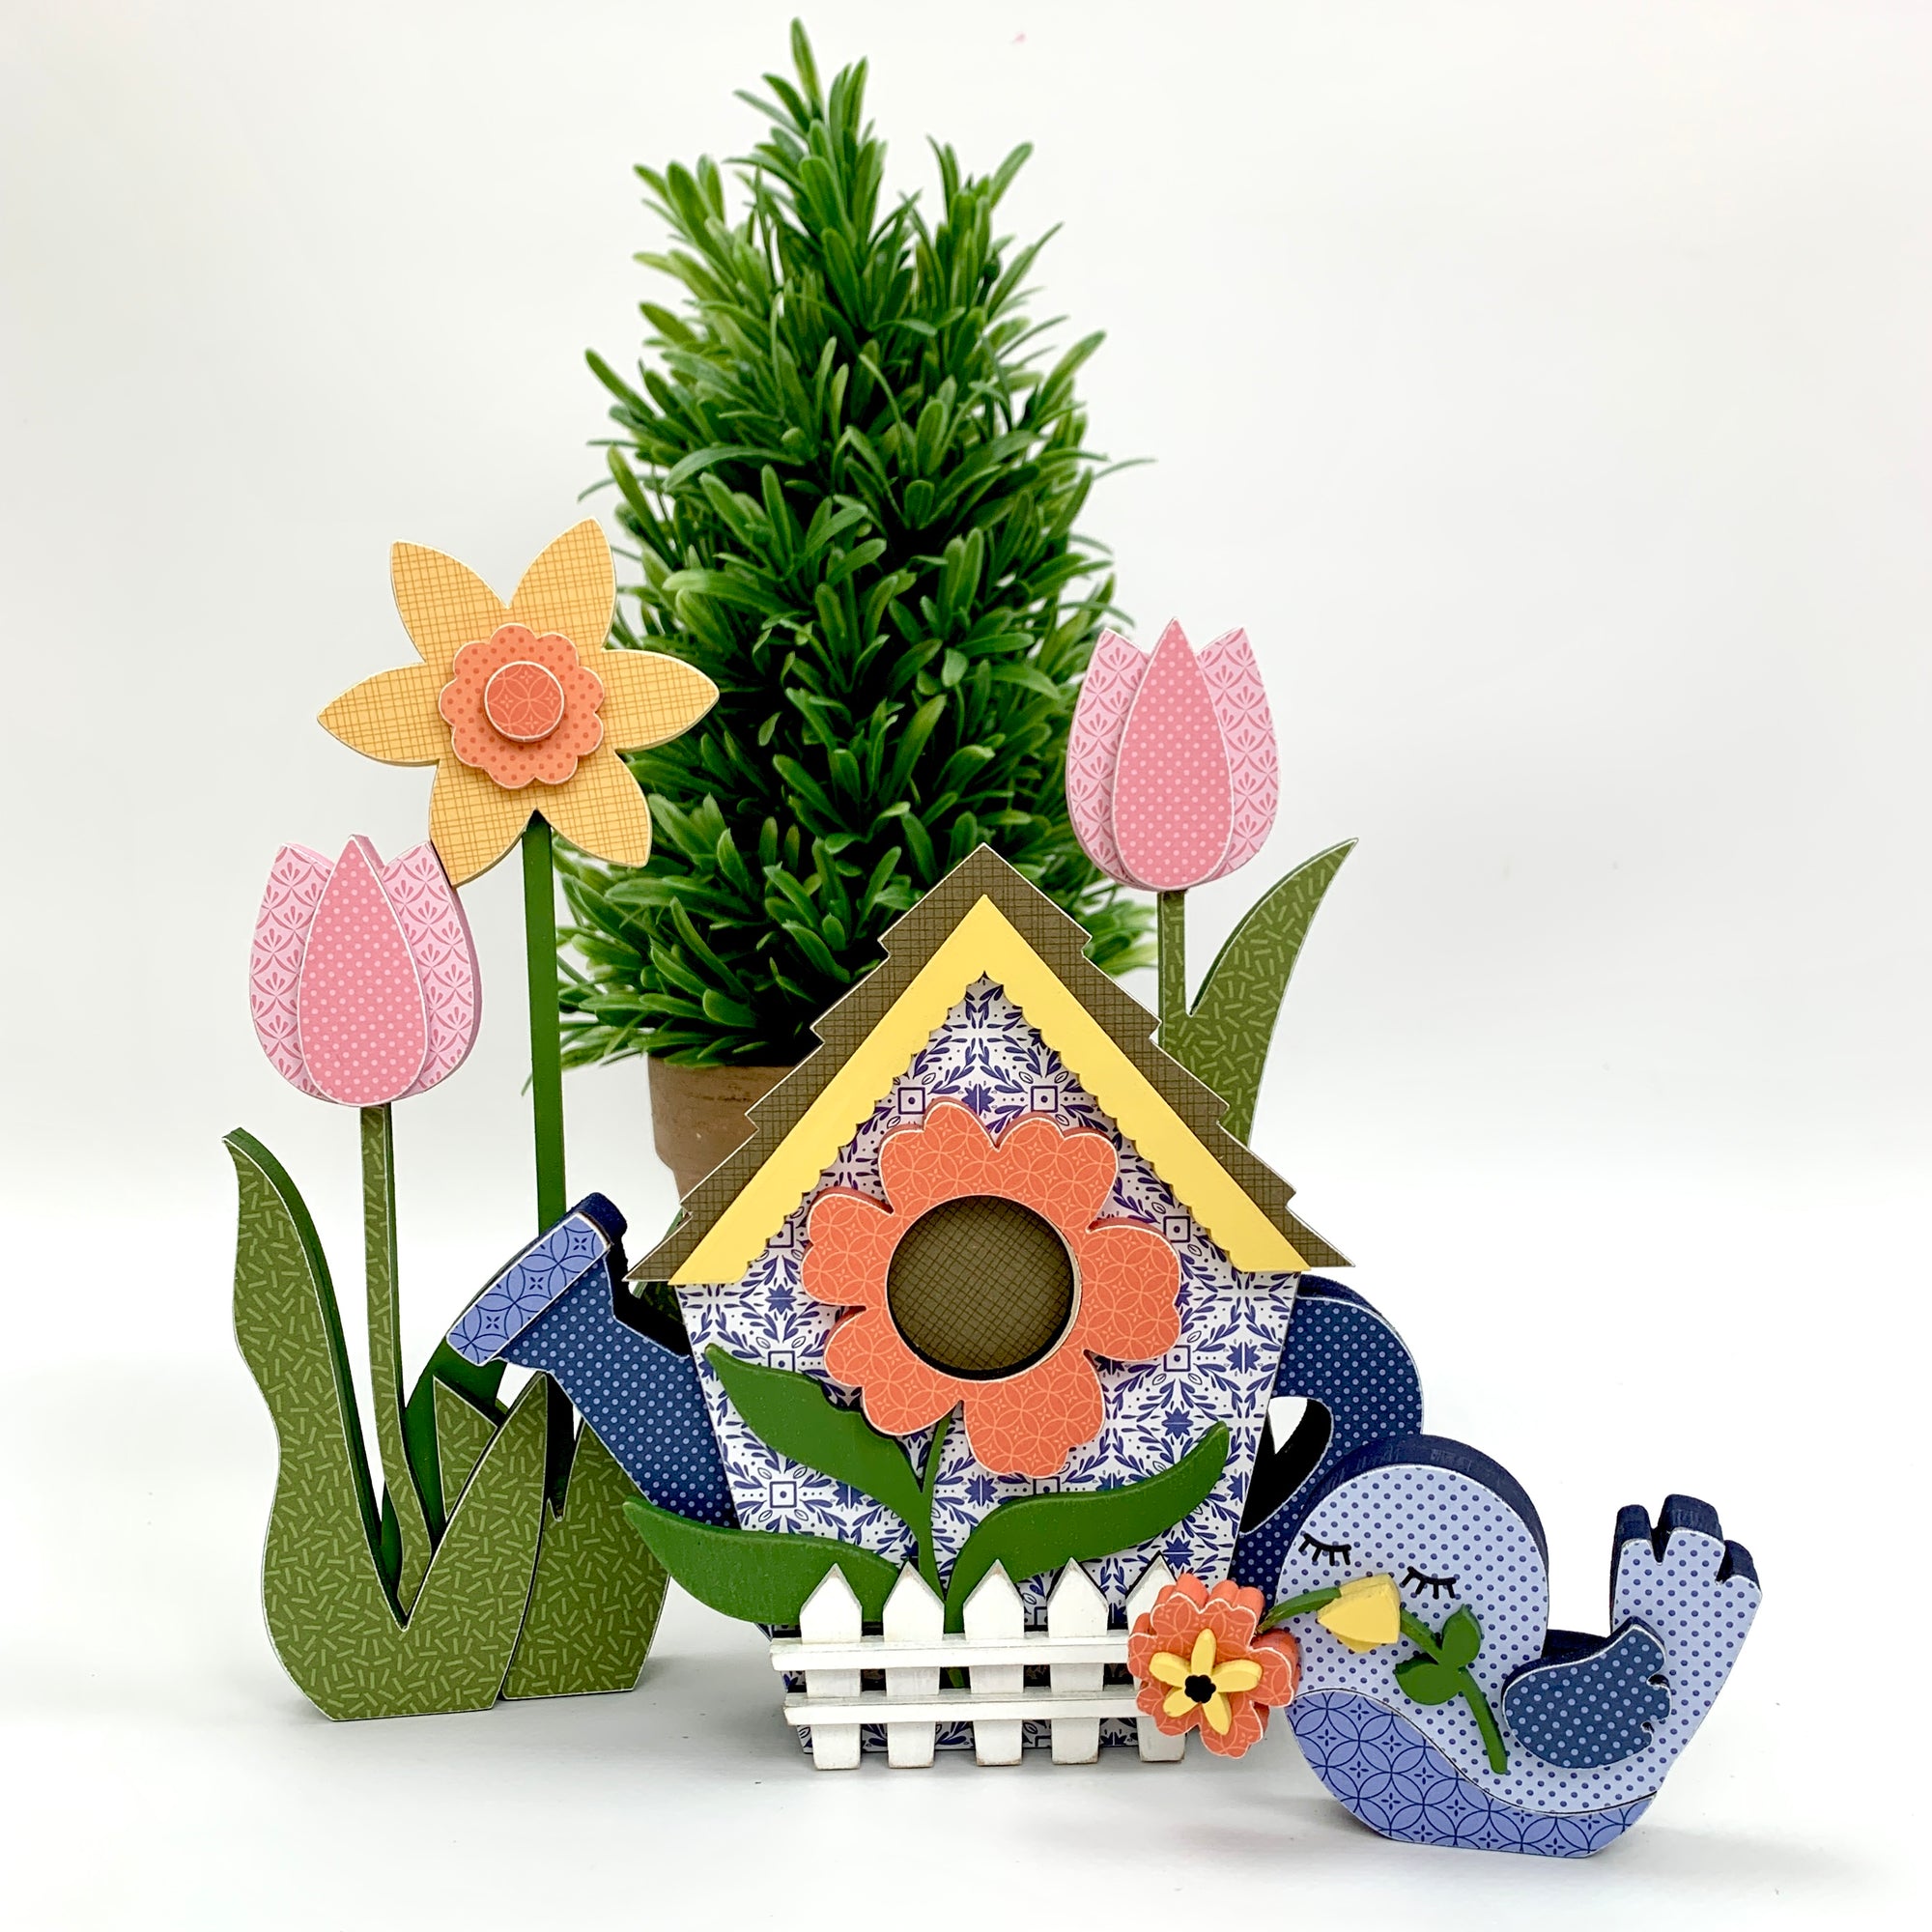 Wood watering can shaped like a birdhouse, with bluebird, tulips, and daffodils. Sping wood decor craft kit. 